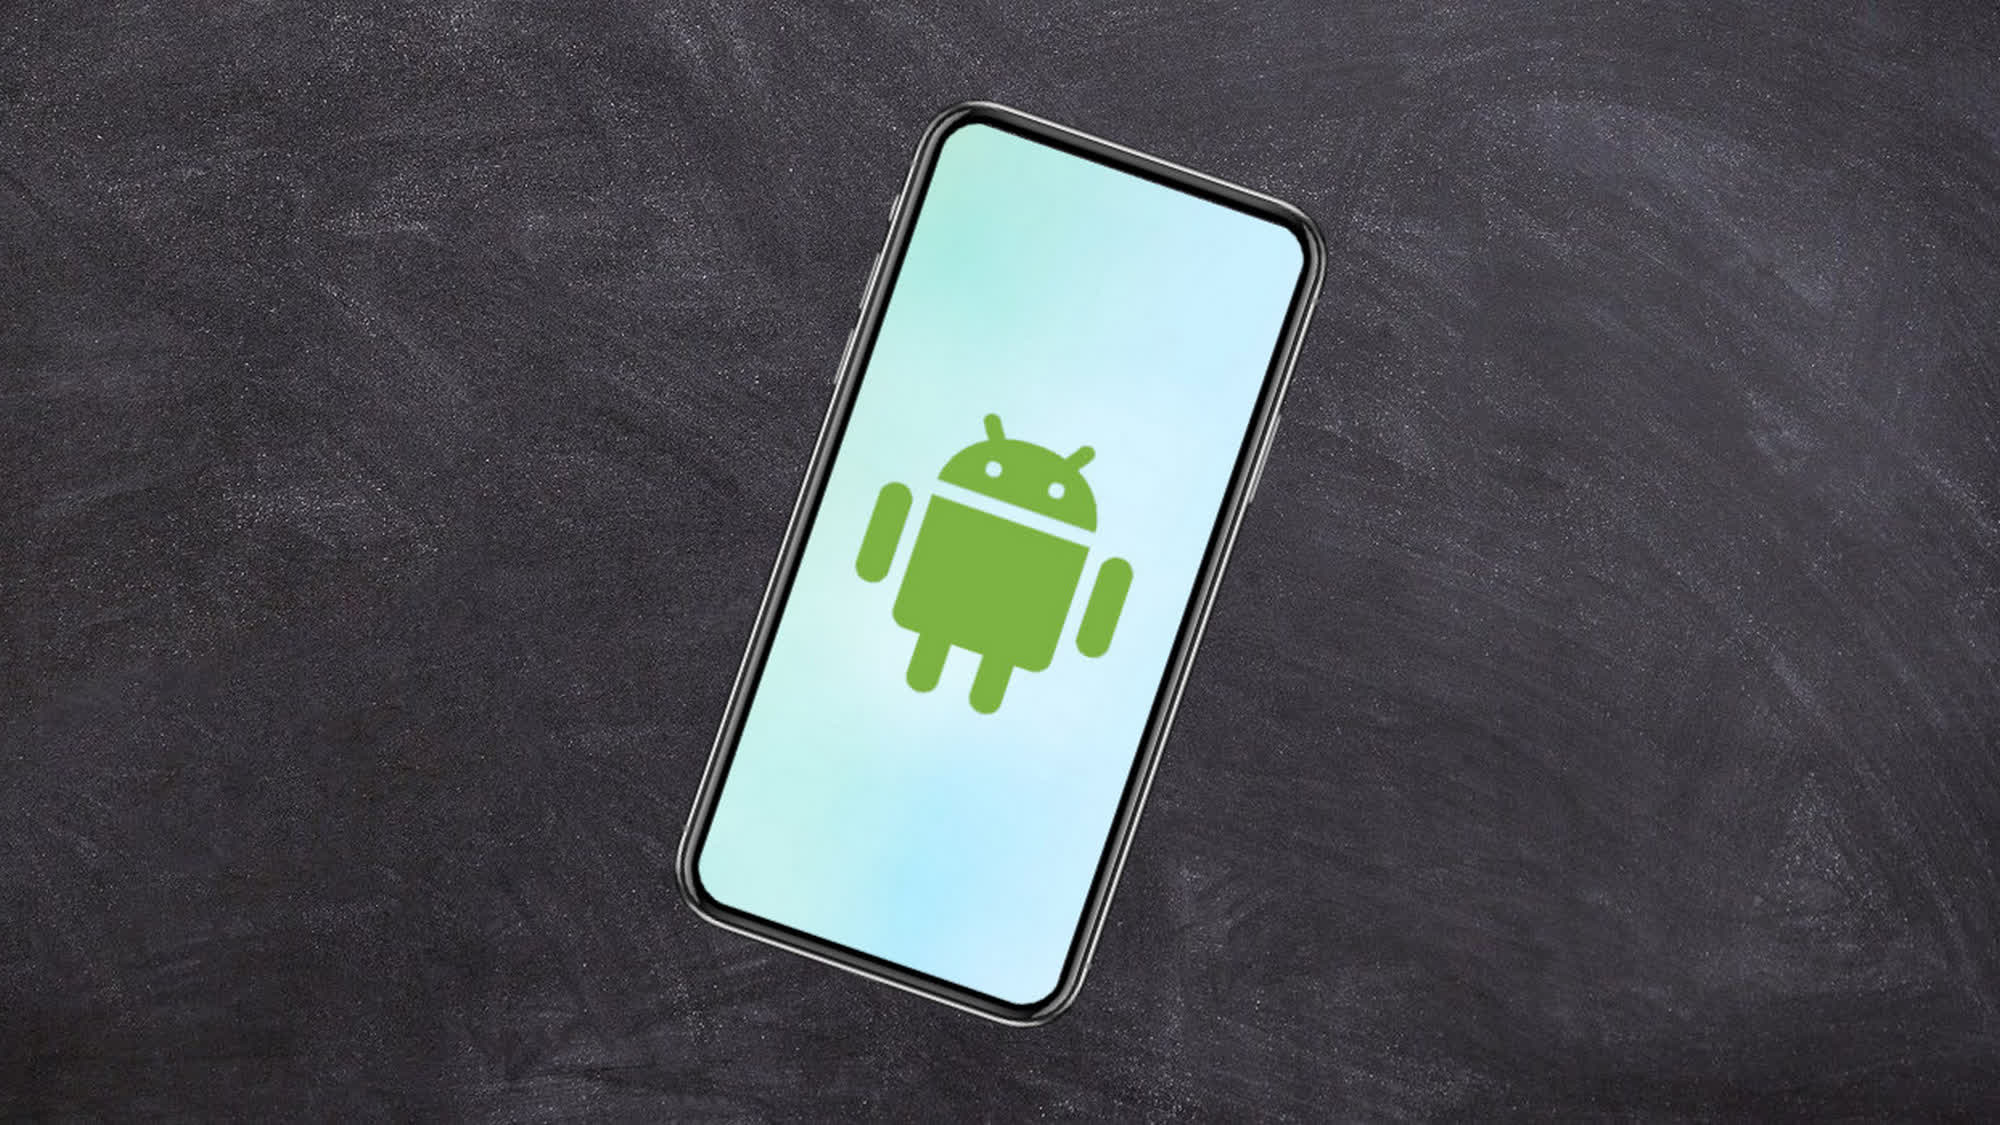 Google's latest Android Runtime update could reduce app launch times by up to 30%